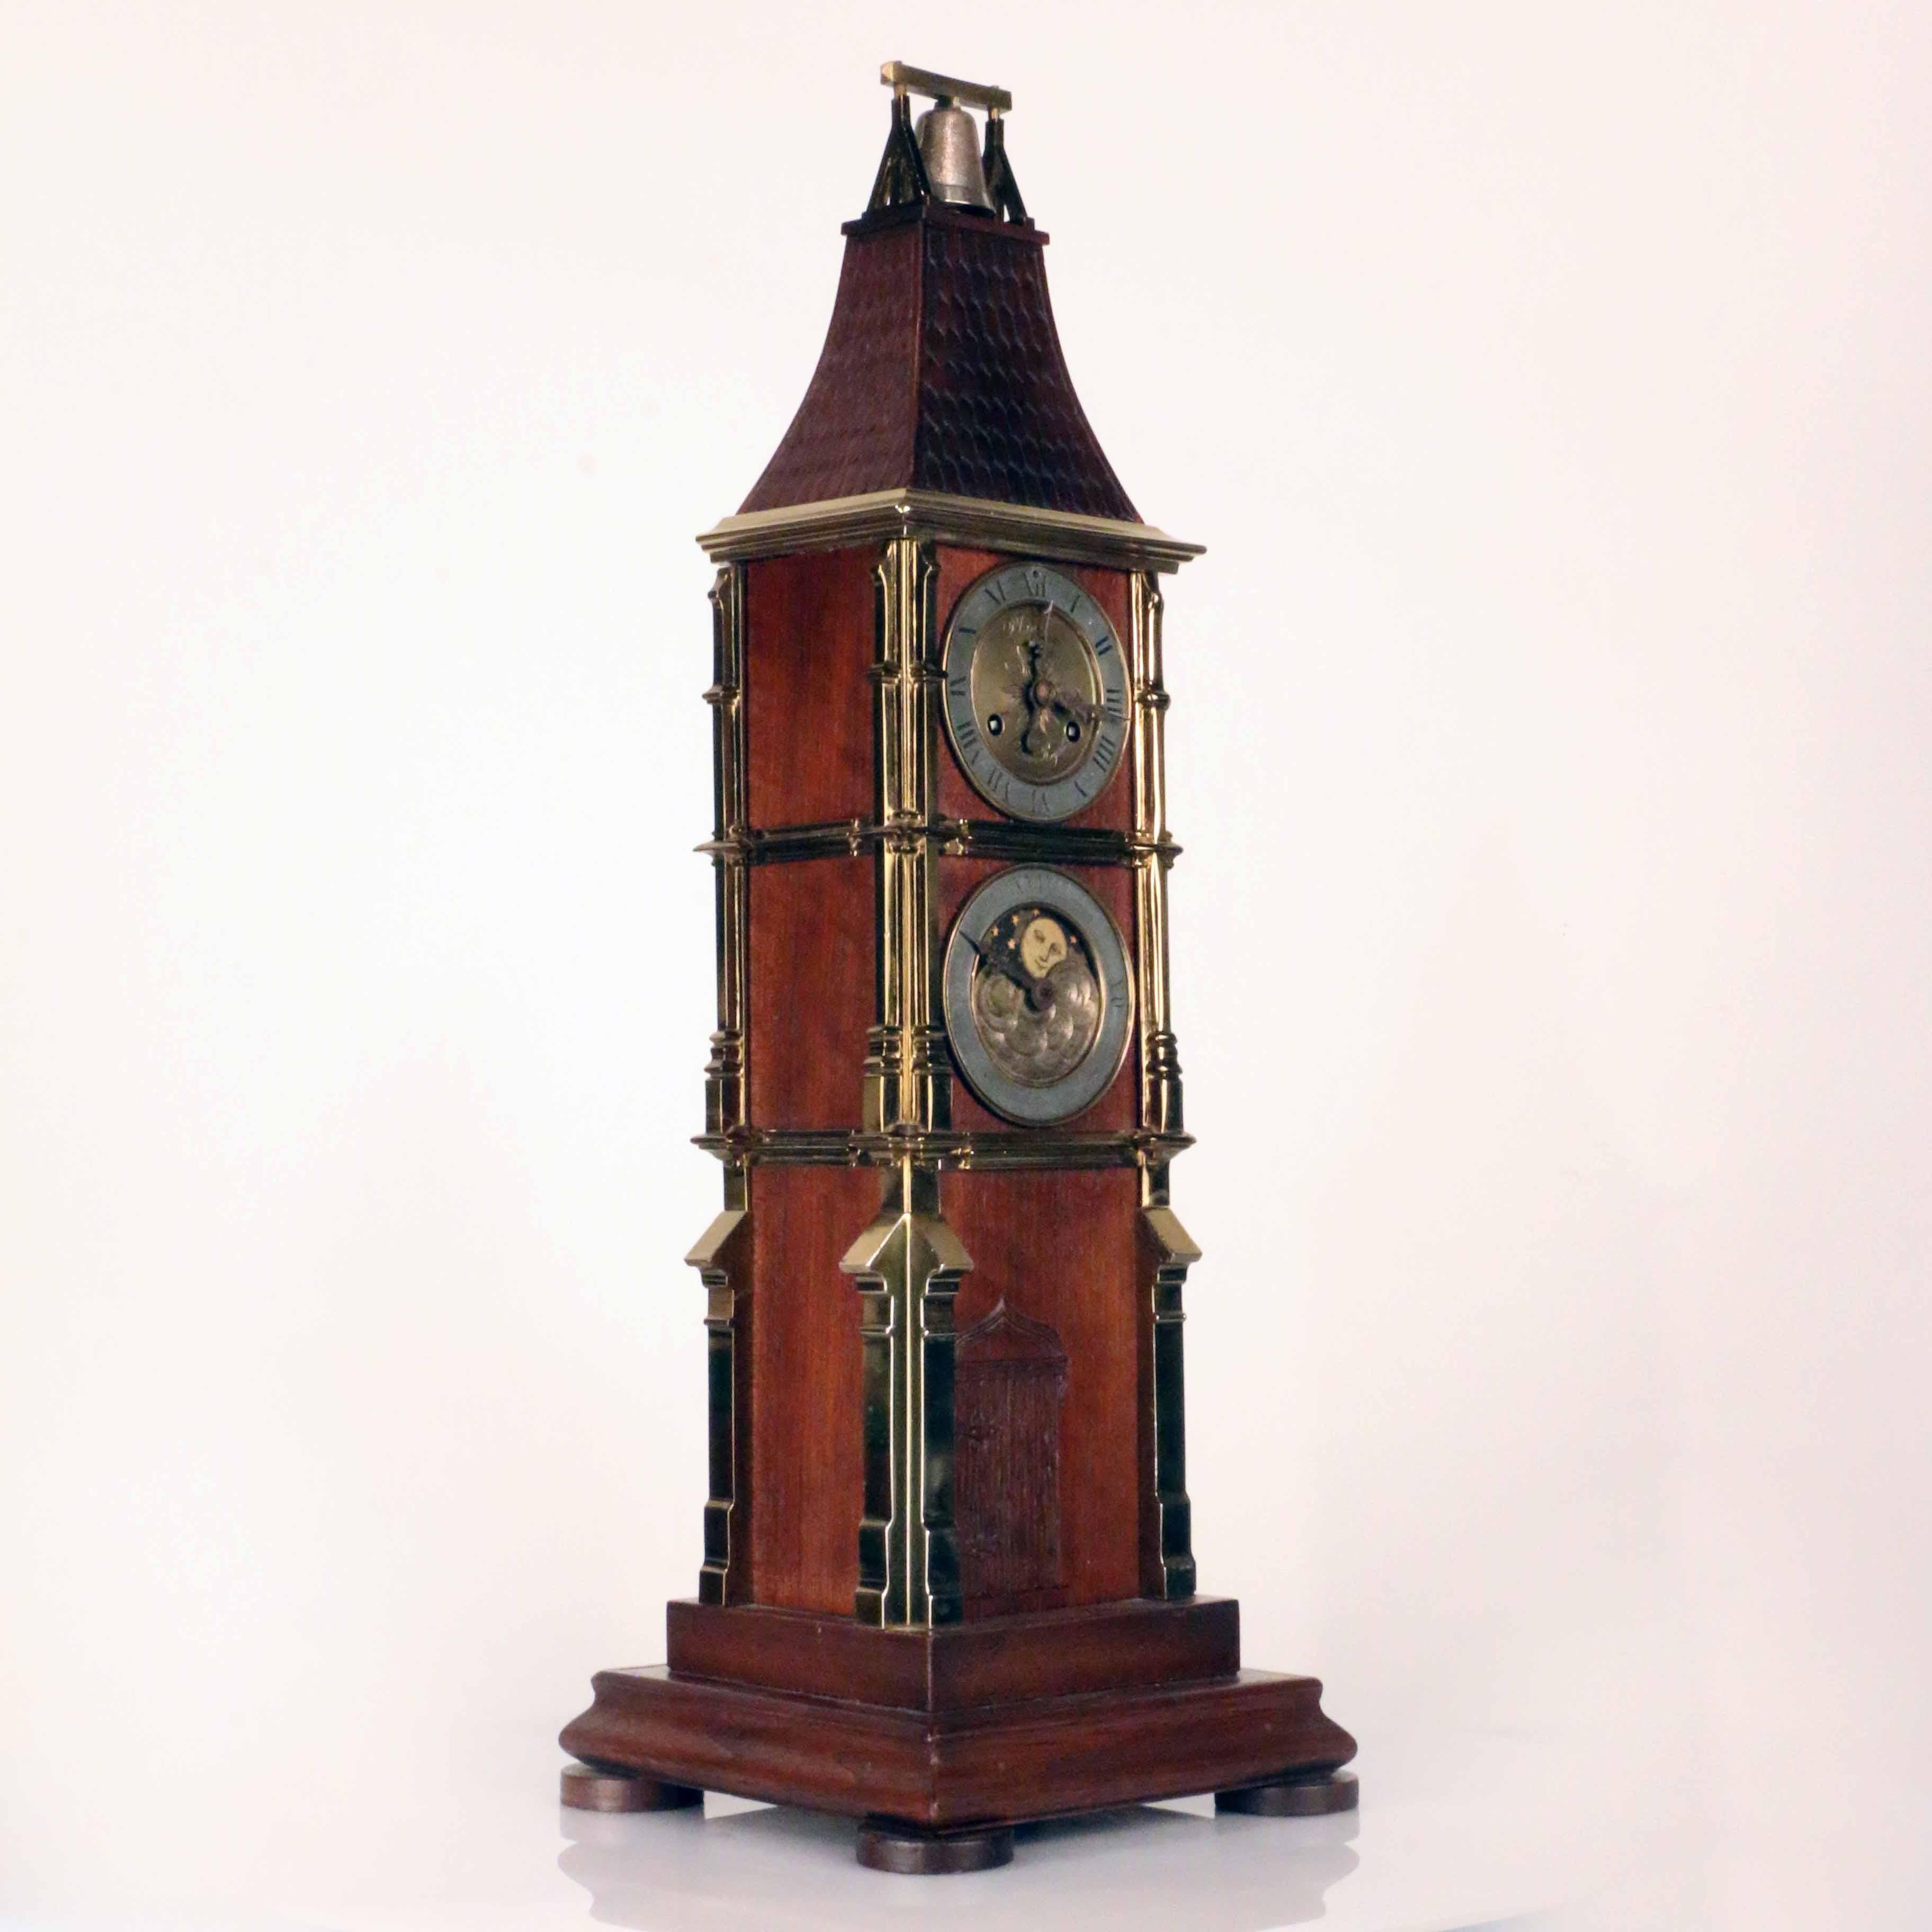 Mathieu Planchon was a Horloger whose clocks were retailed on the celebrated Palais Royal. This particular example is a scale model of the clock at Bourges Cathedral, the oldest Astronomical clock in France.

Signed on the dial and movement, above